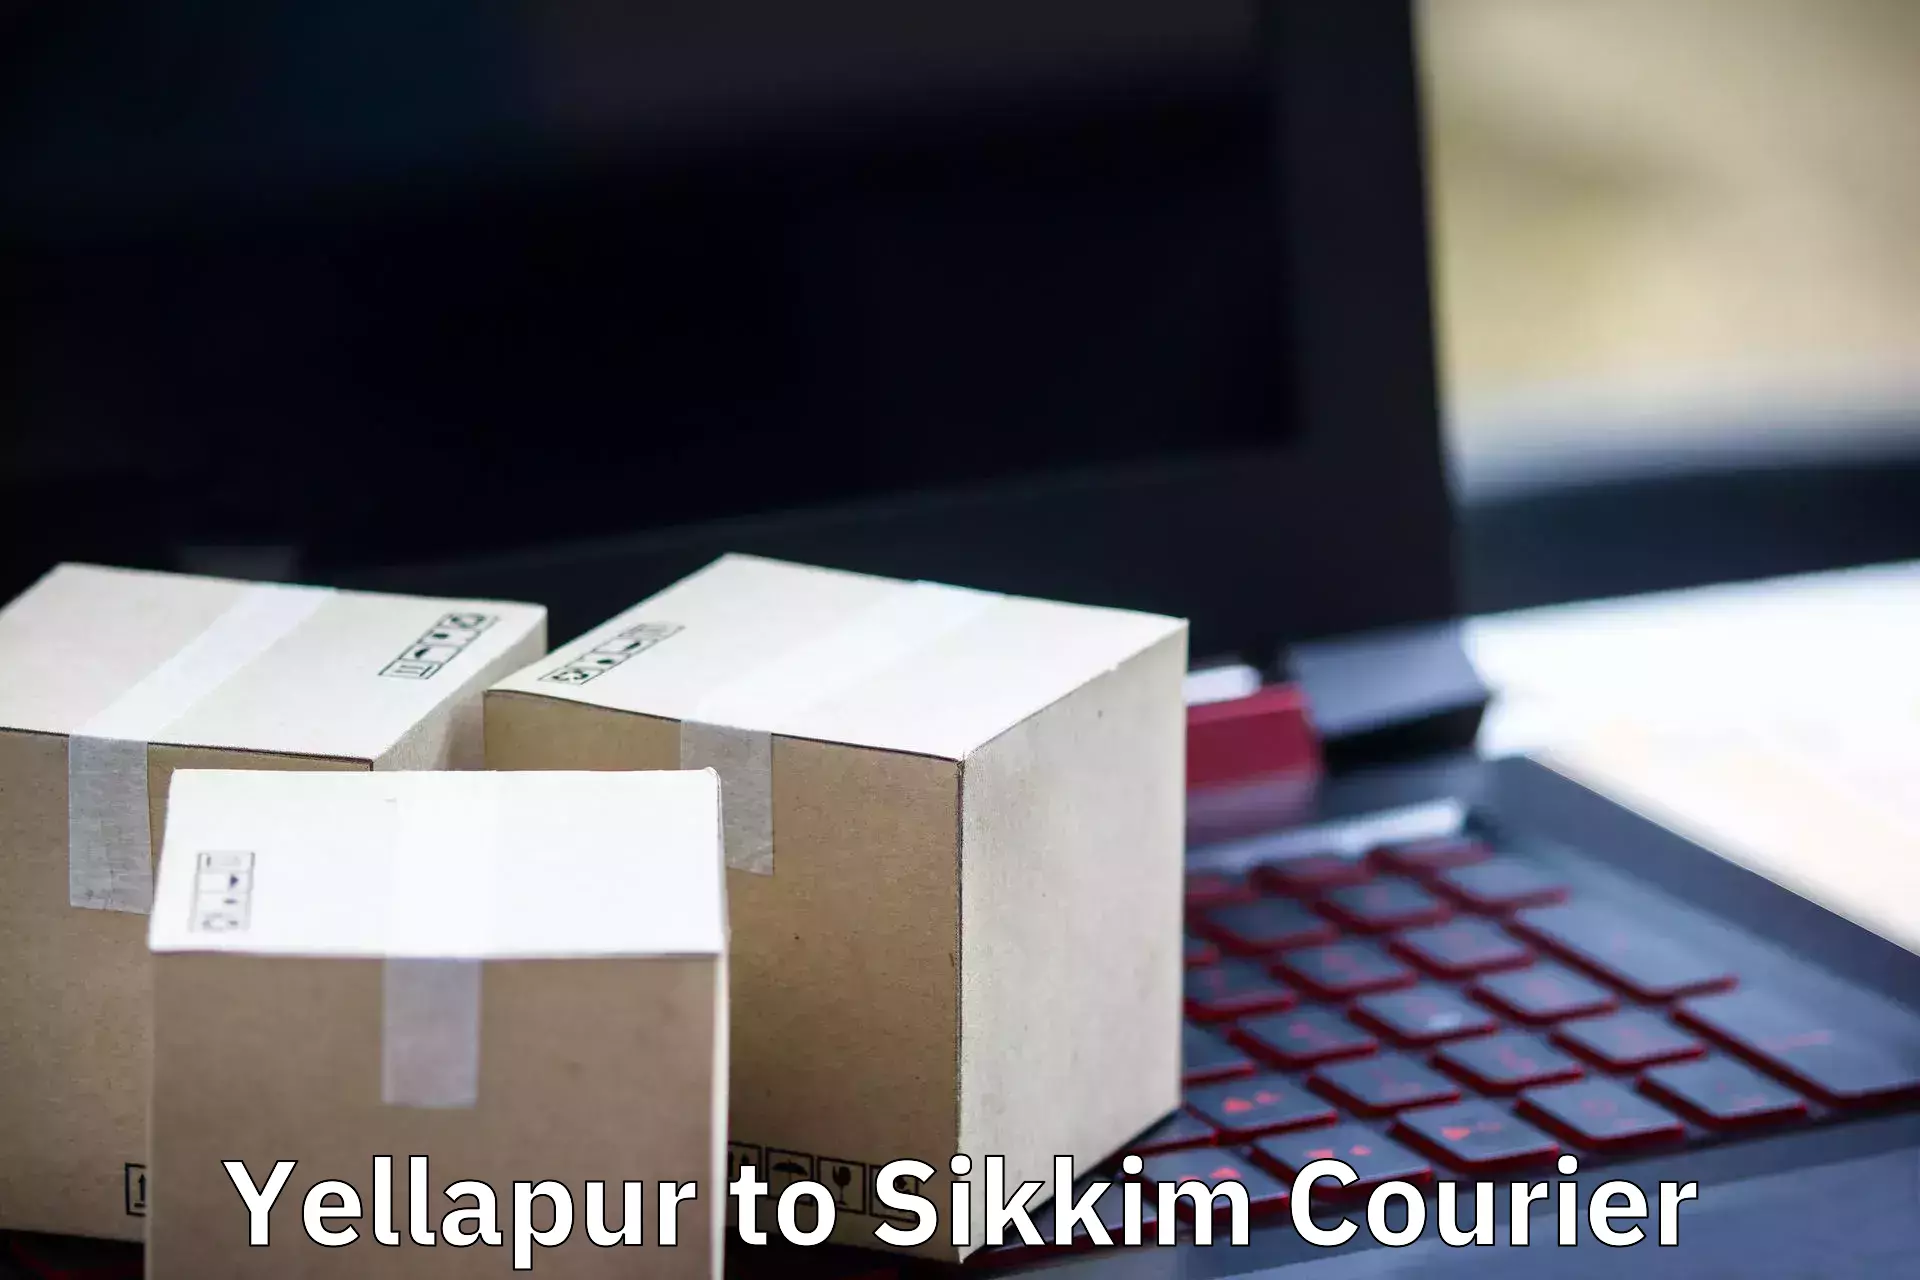 Trusted relocation experts Yellapur to North Sikkim